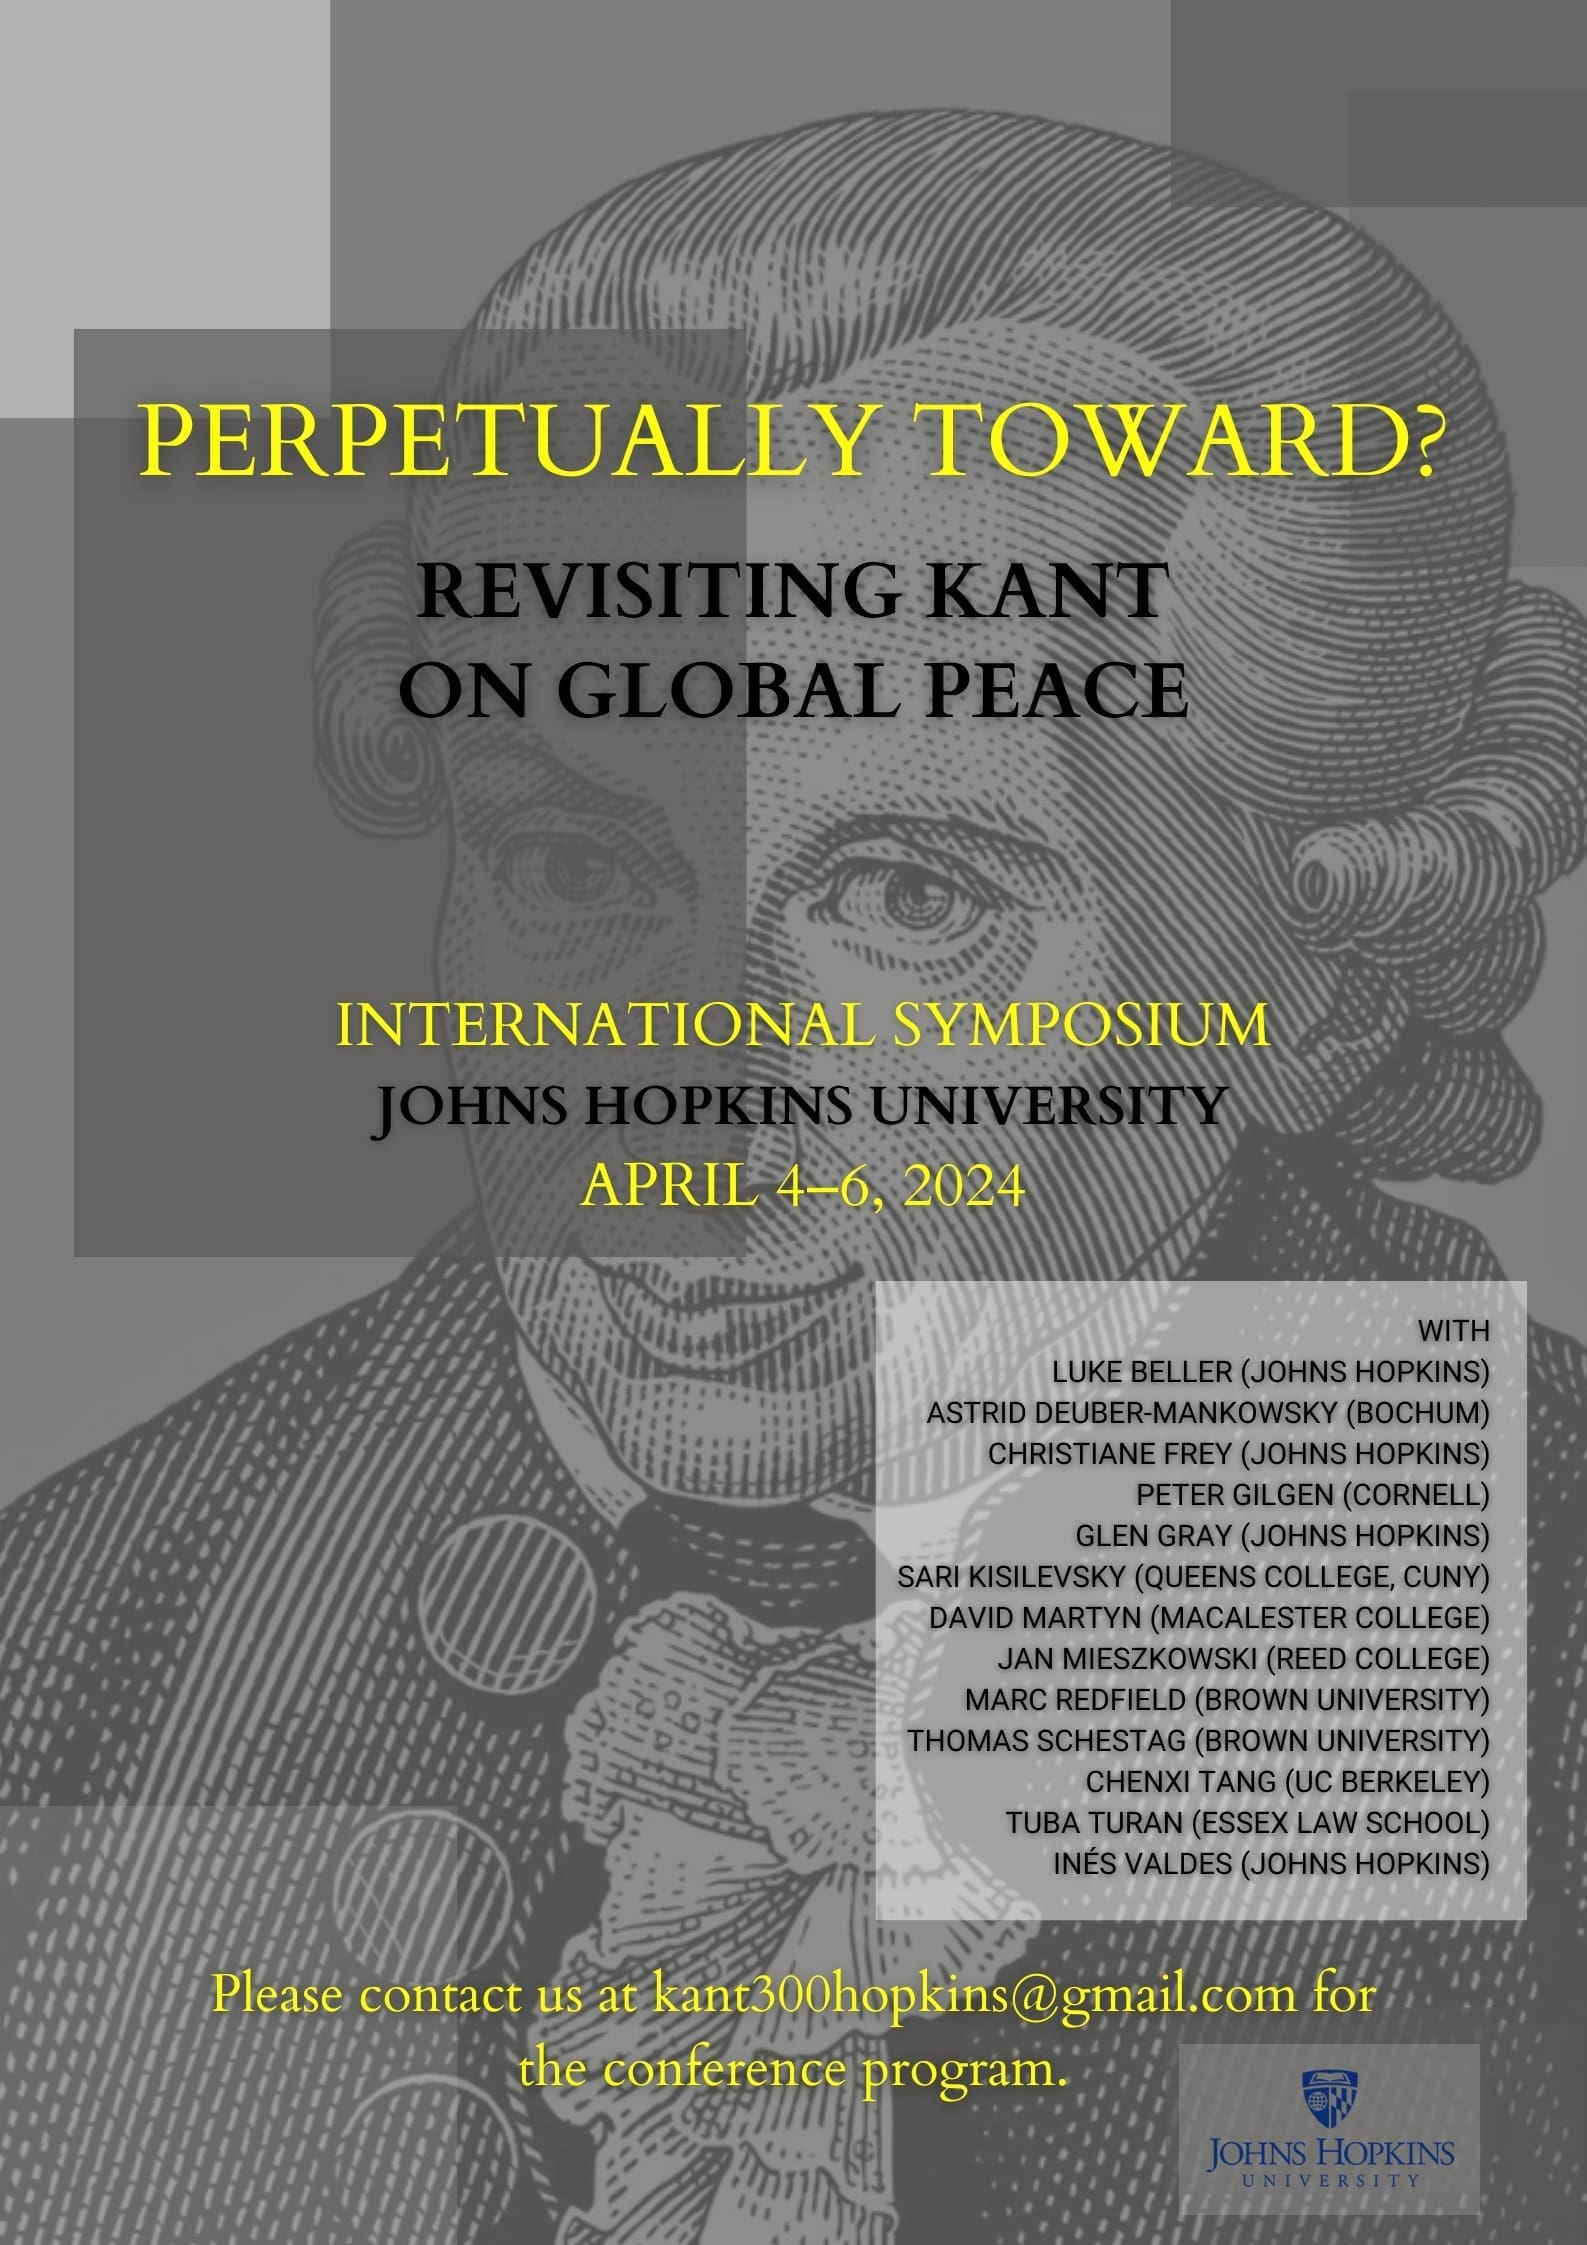 International Symposium “Perpetually Toward? Revisiting Kant on Global Peace” hosted at JHU